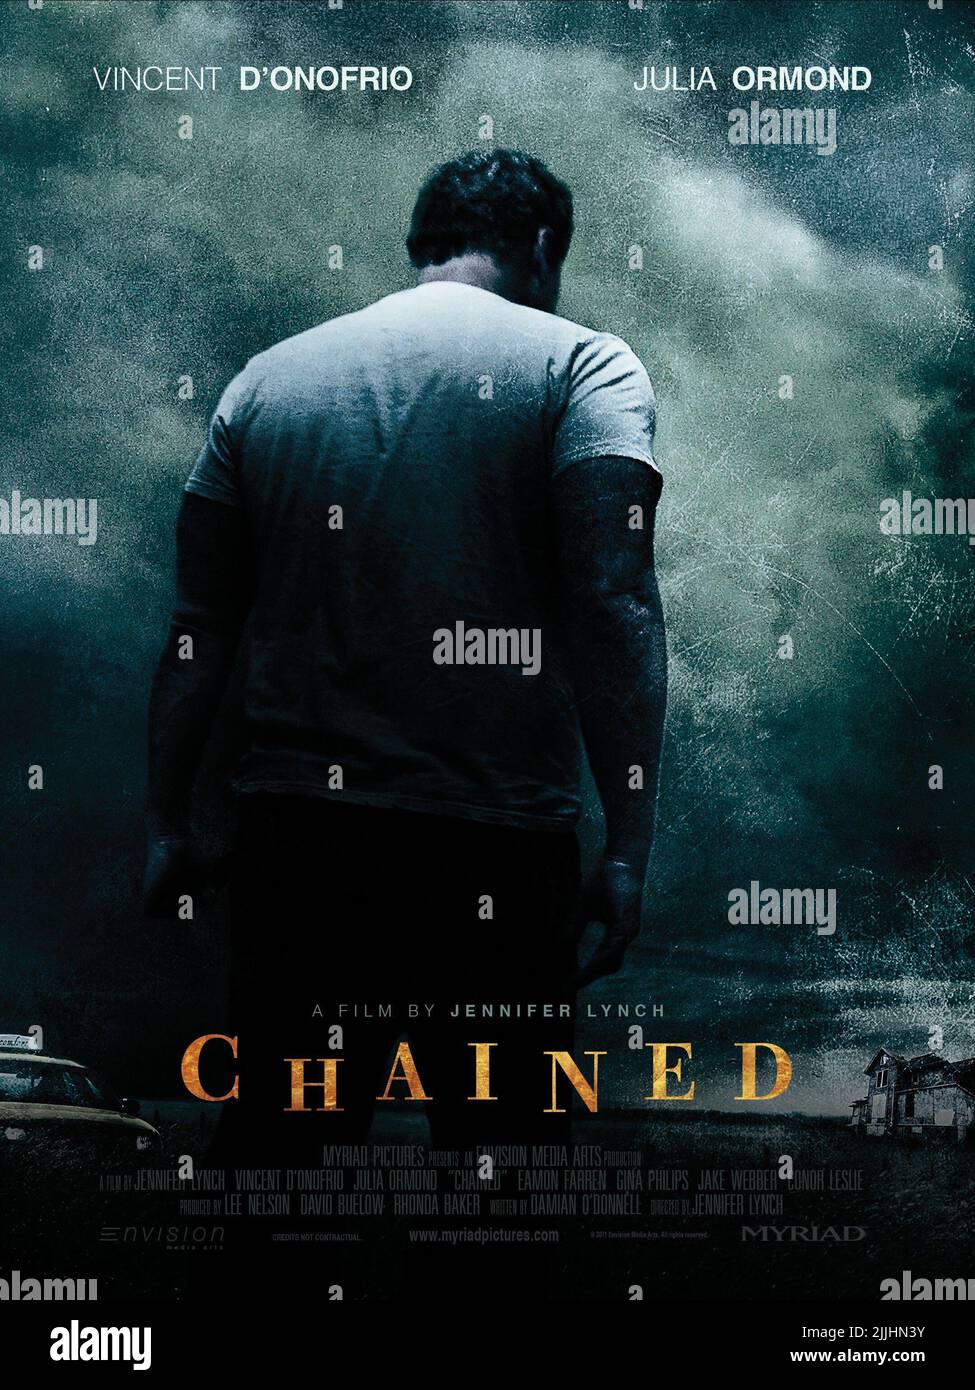 VINCENT D'ONOFRIO POSTER, CHAINED, 2012 Stock Photo